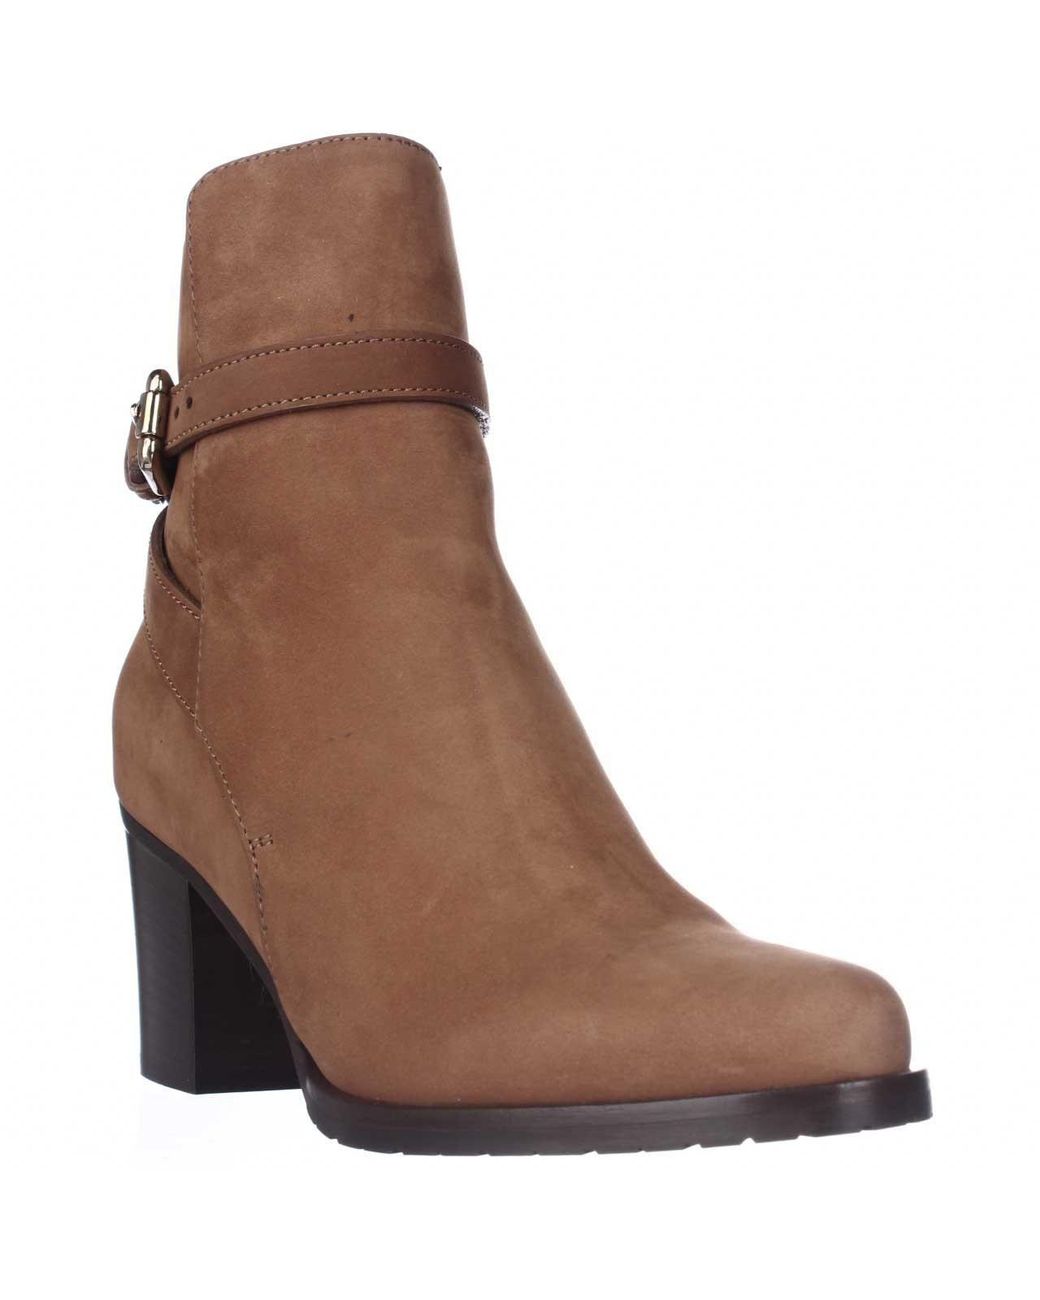 L.K.Bennett Leather Aleena Fashion Casual Ankle Boots in Brown - Save ...